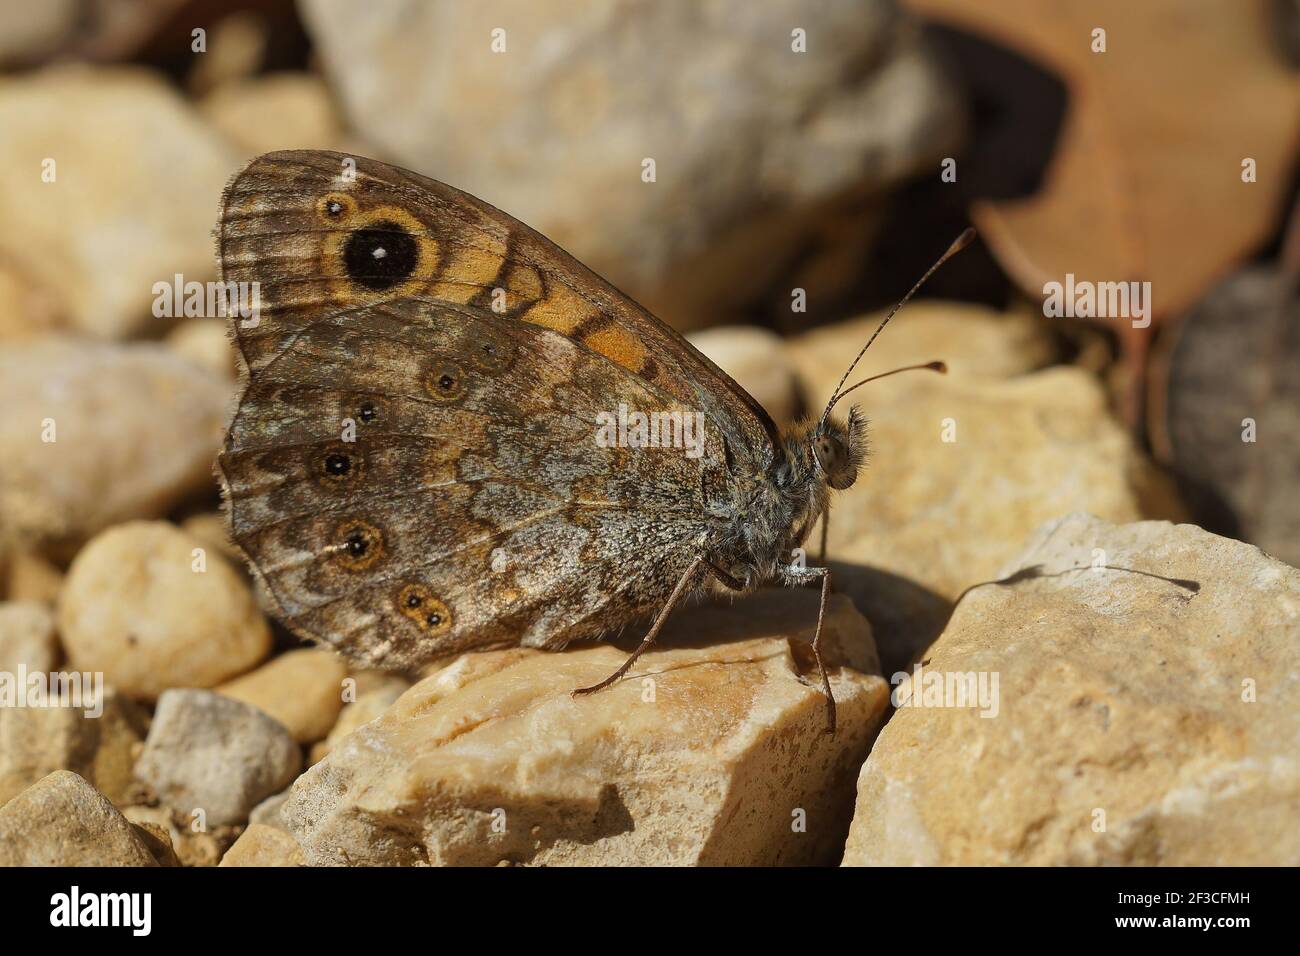 A closeup shot of the brown butterfly, Lasiommata megera from Southern France Stock Photo